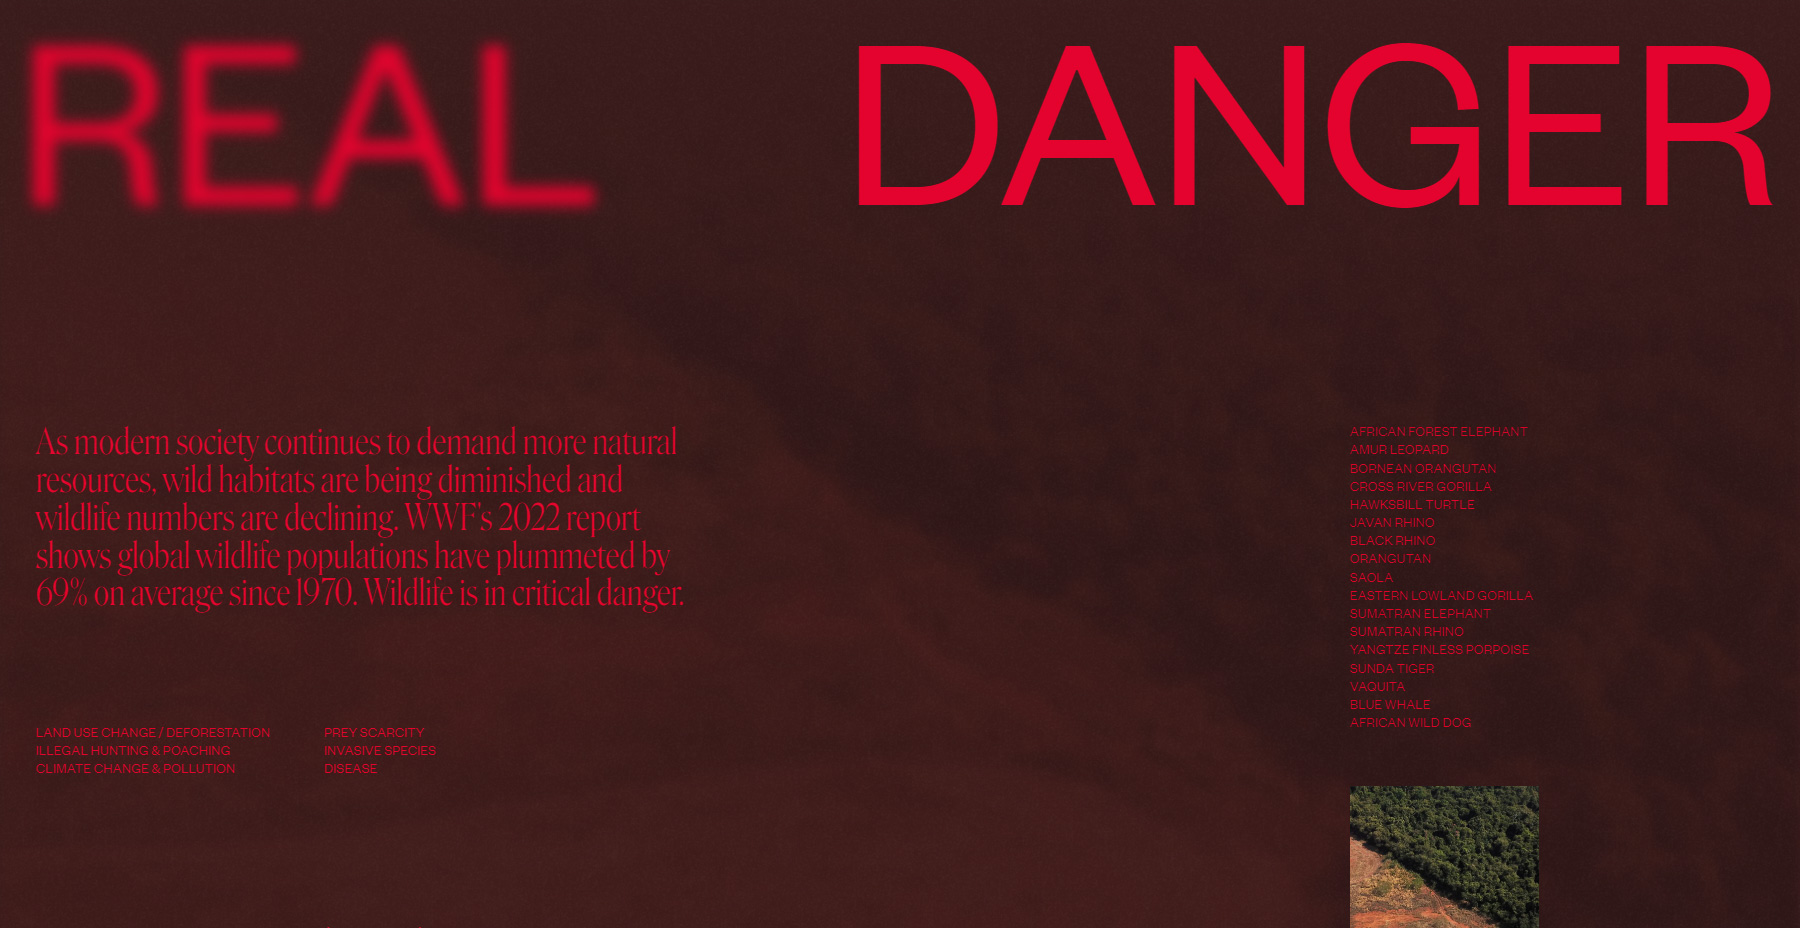 Critical Danger - Website of the Day